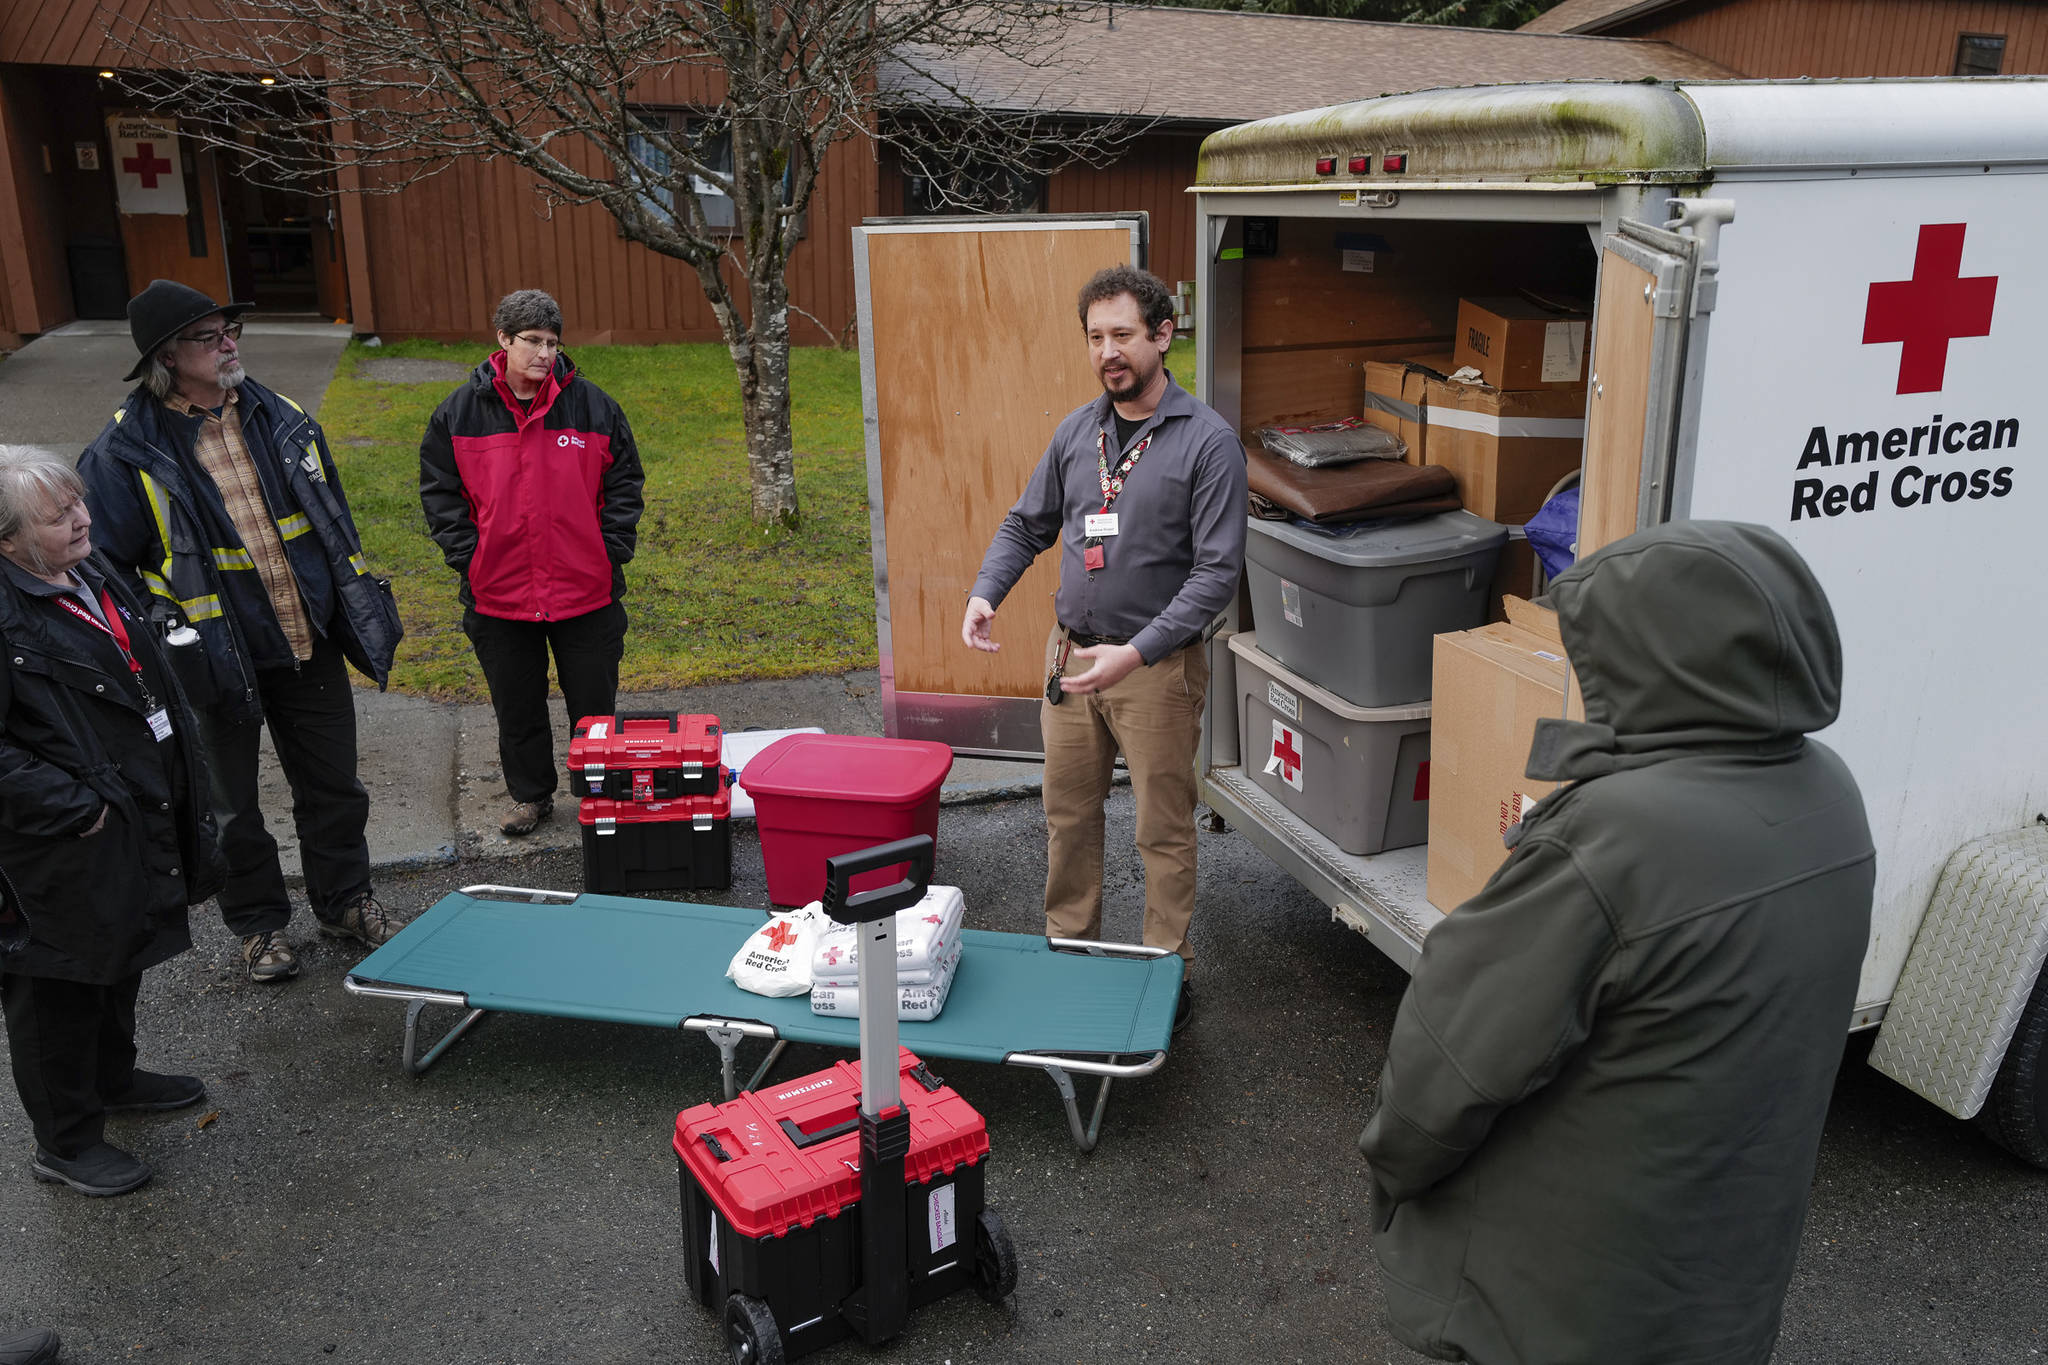 Andrew Bogar, disaster program manager for the American Red Cross in Juneau, shows emergency supplies during a workshop at the Shepherd of the Valley Lutheran Church on Friday, Nov. 15, 2019. The Red Cross is hosting a three-day Southeast Disaster Institute. (Michael Penn | Juneau Empire)